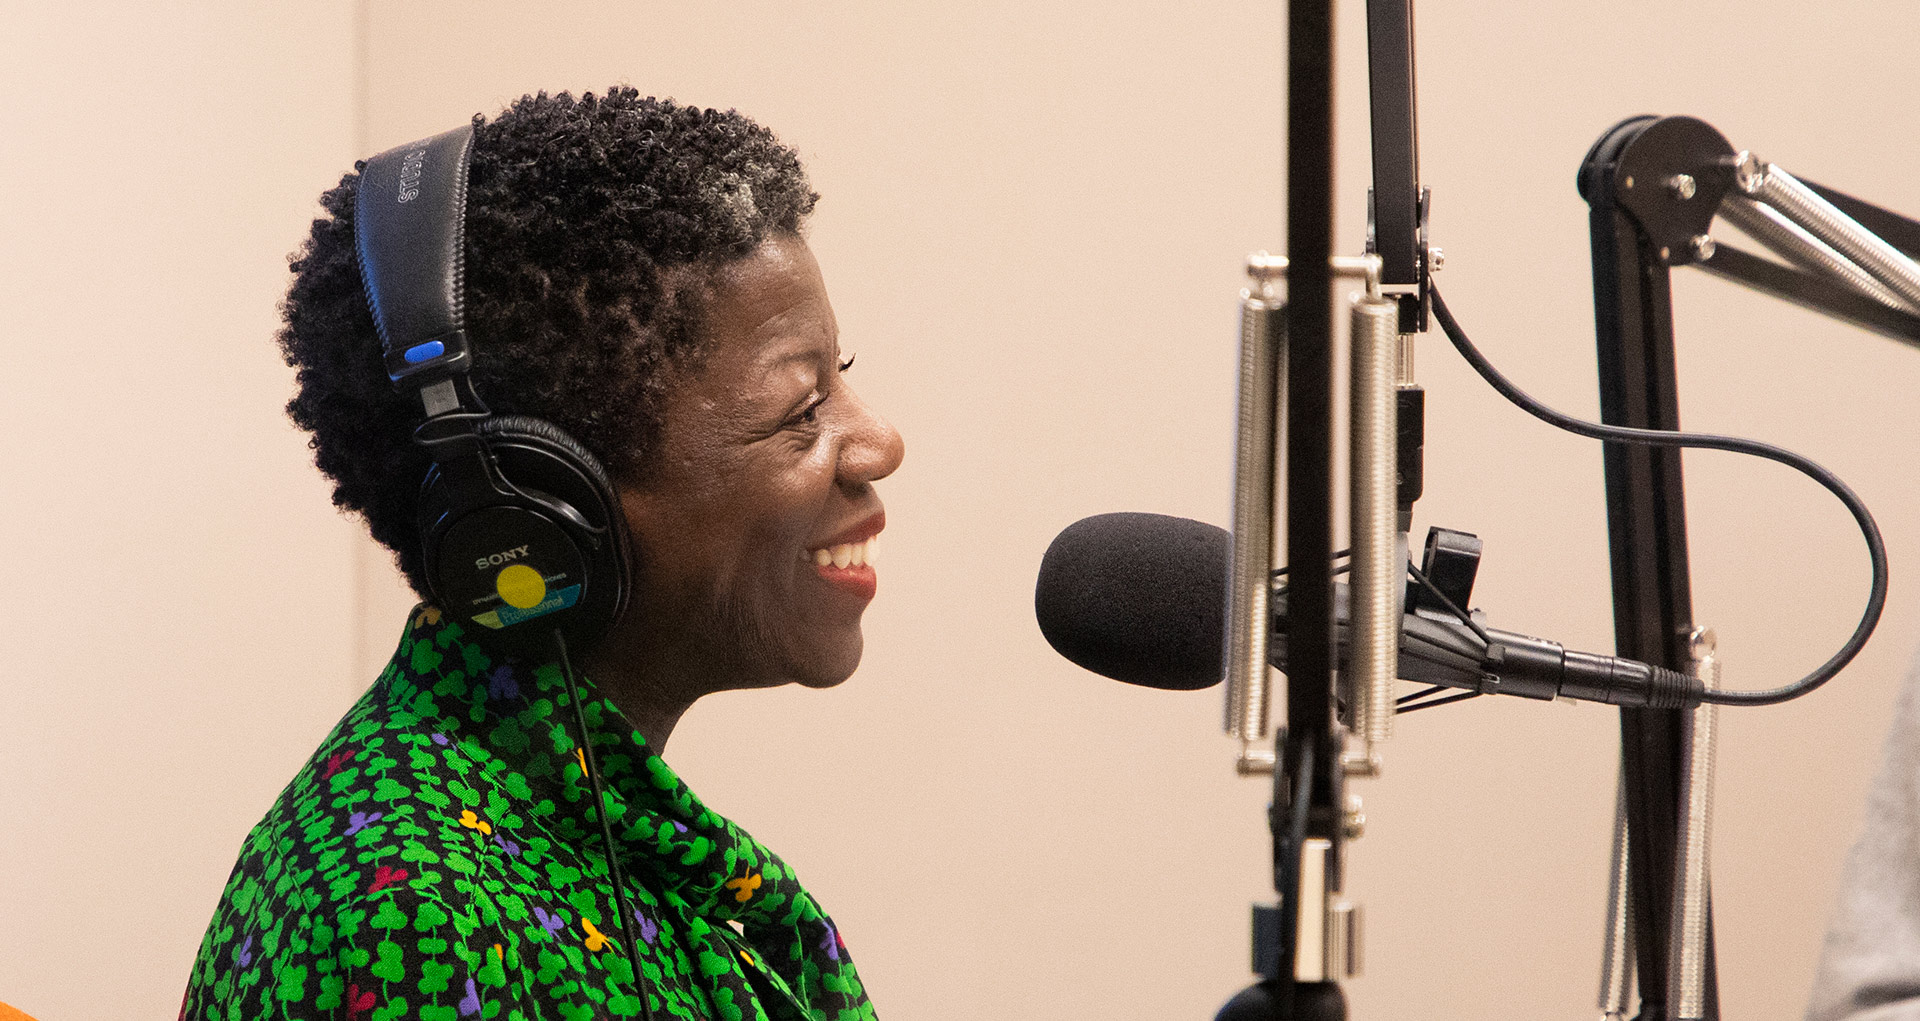 A photo of Thelma Golden recording the David Zwirner podcast in New York, dated 2019.